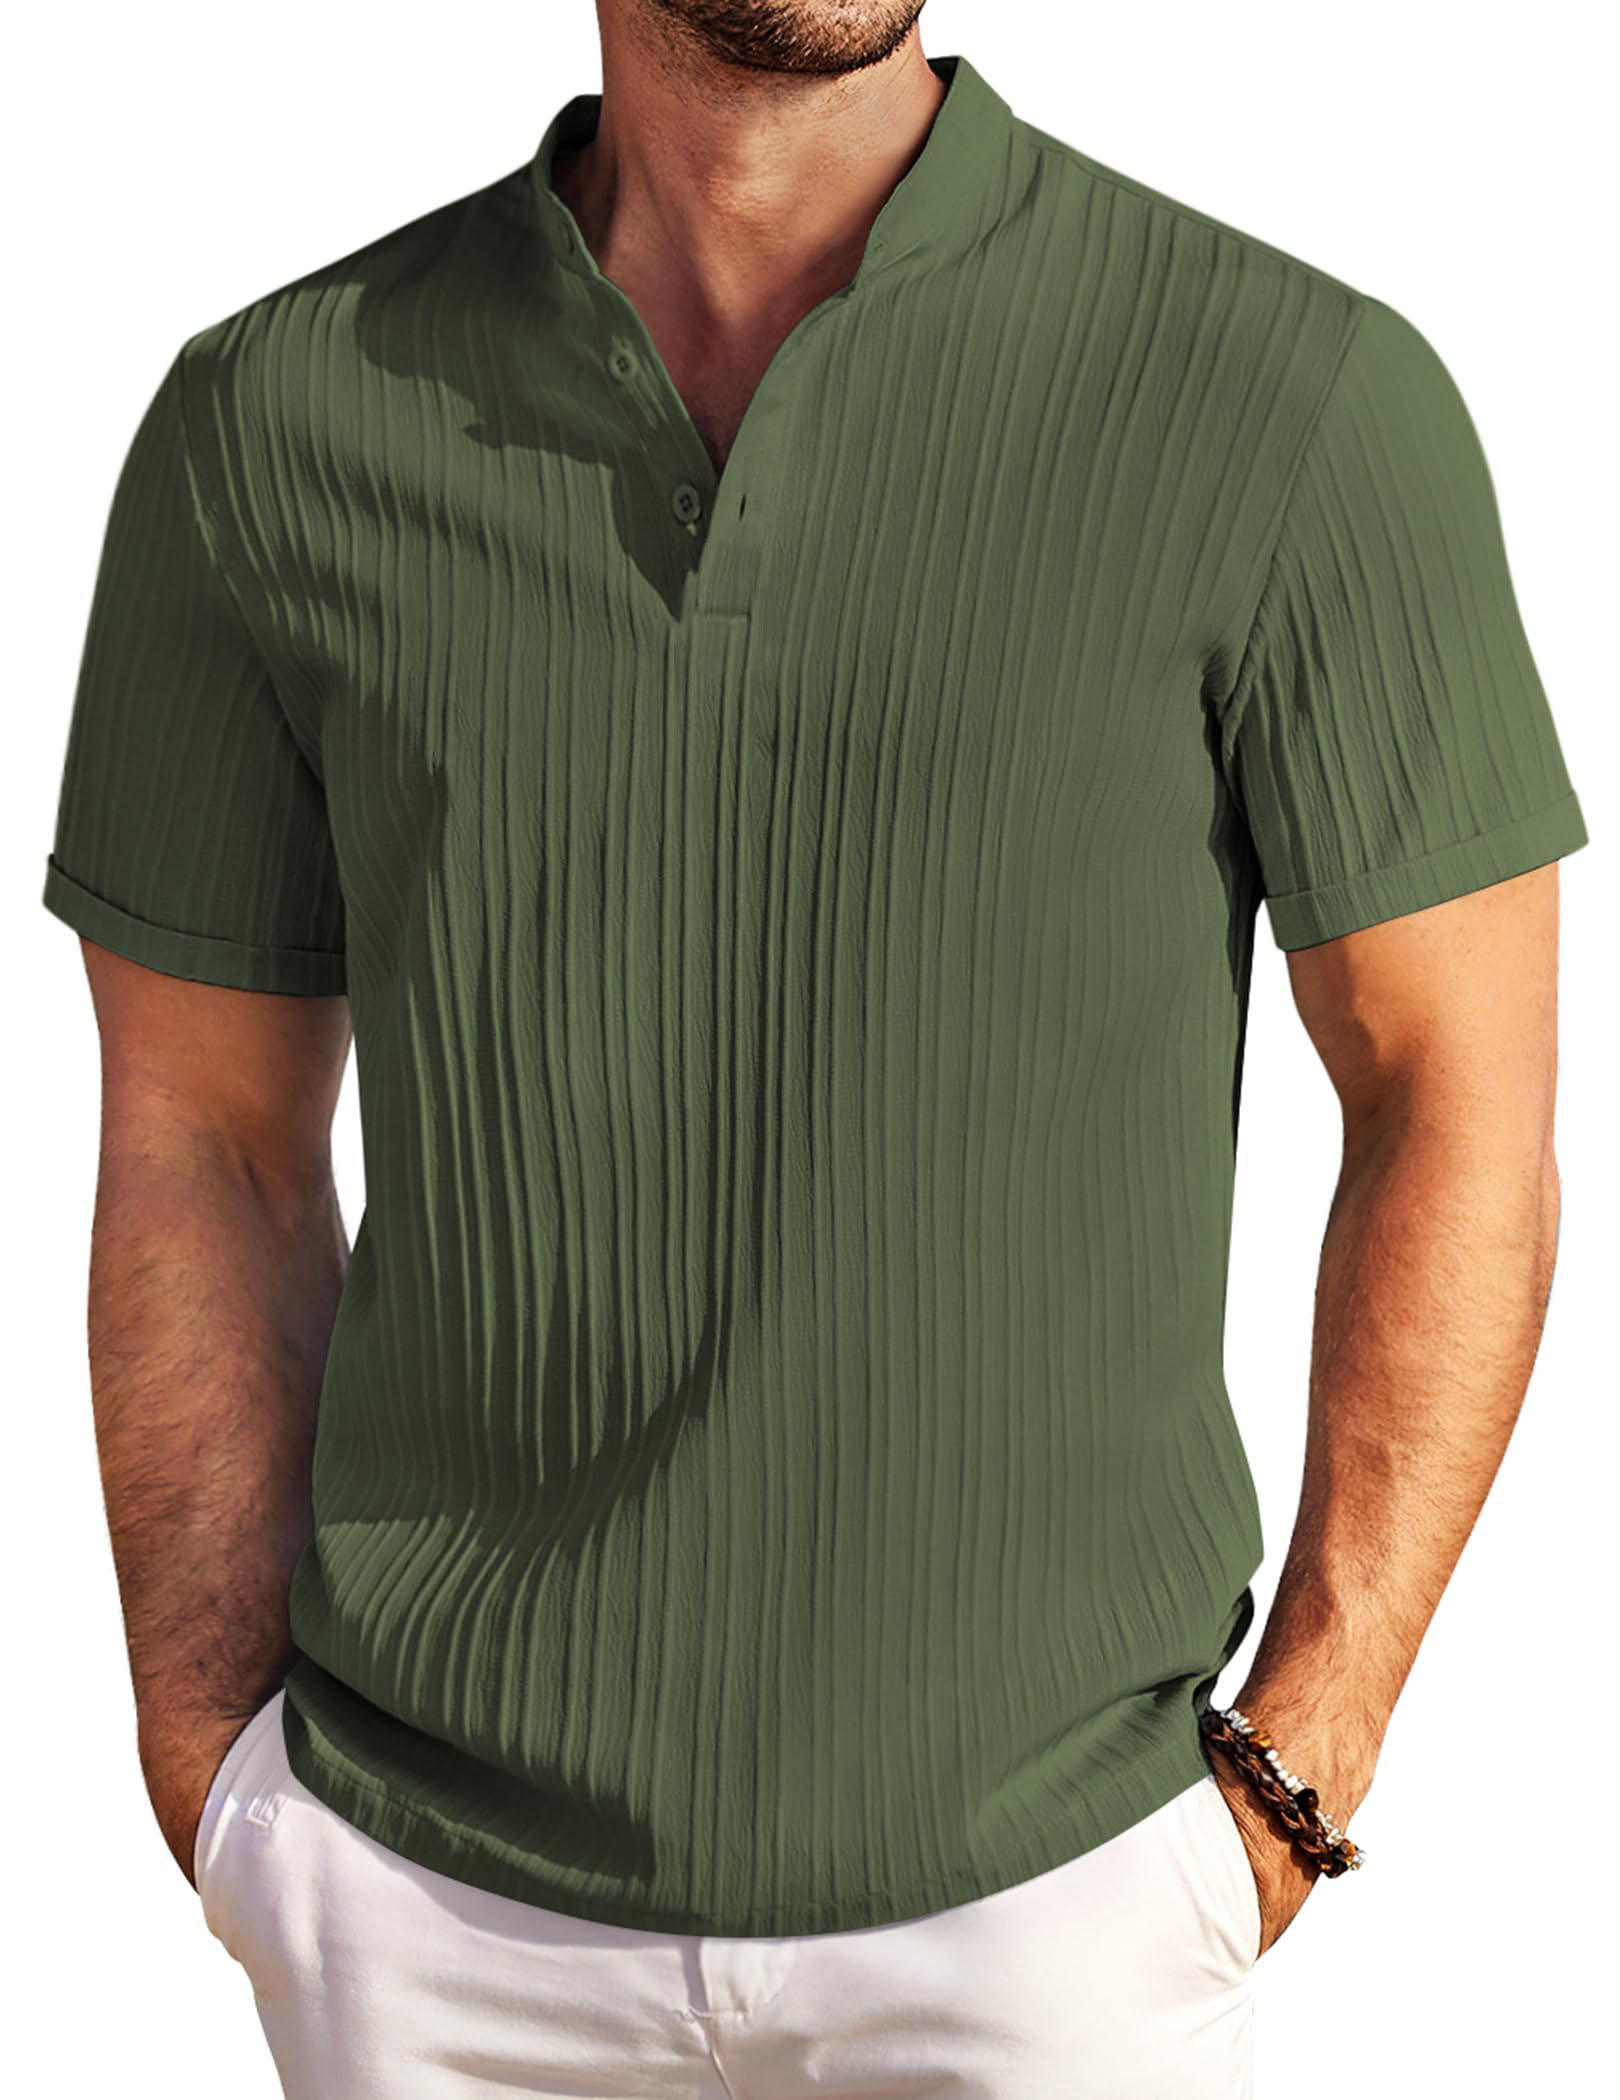 Men's Casual Fashion Striped Short Sleeve Tops